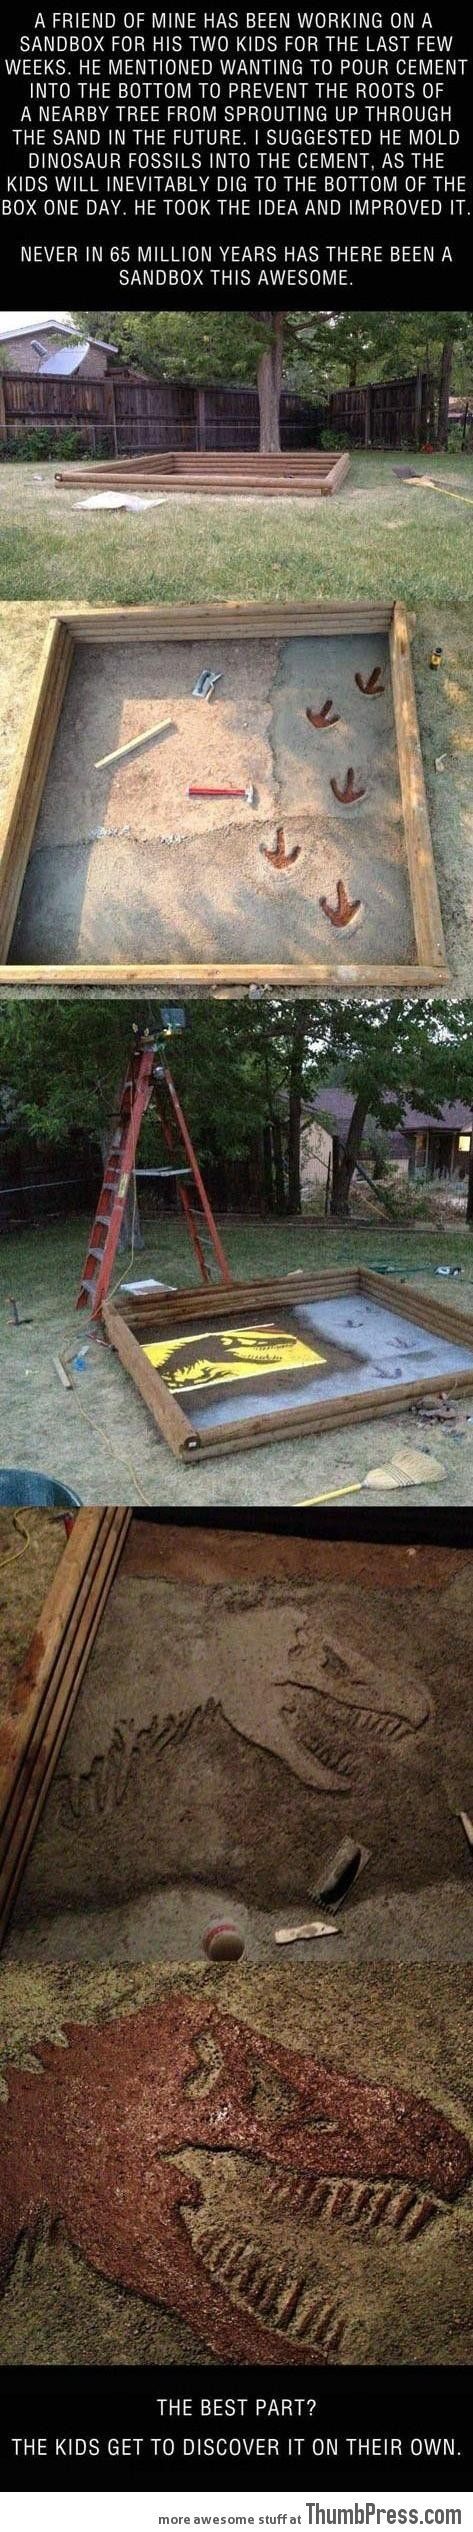 A great sandbox idea! – this dad is awesome!